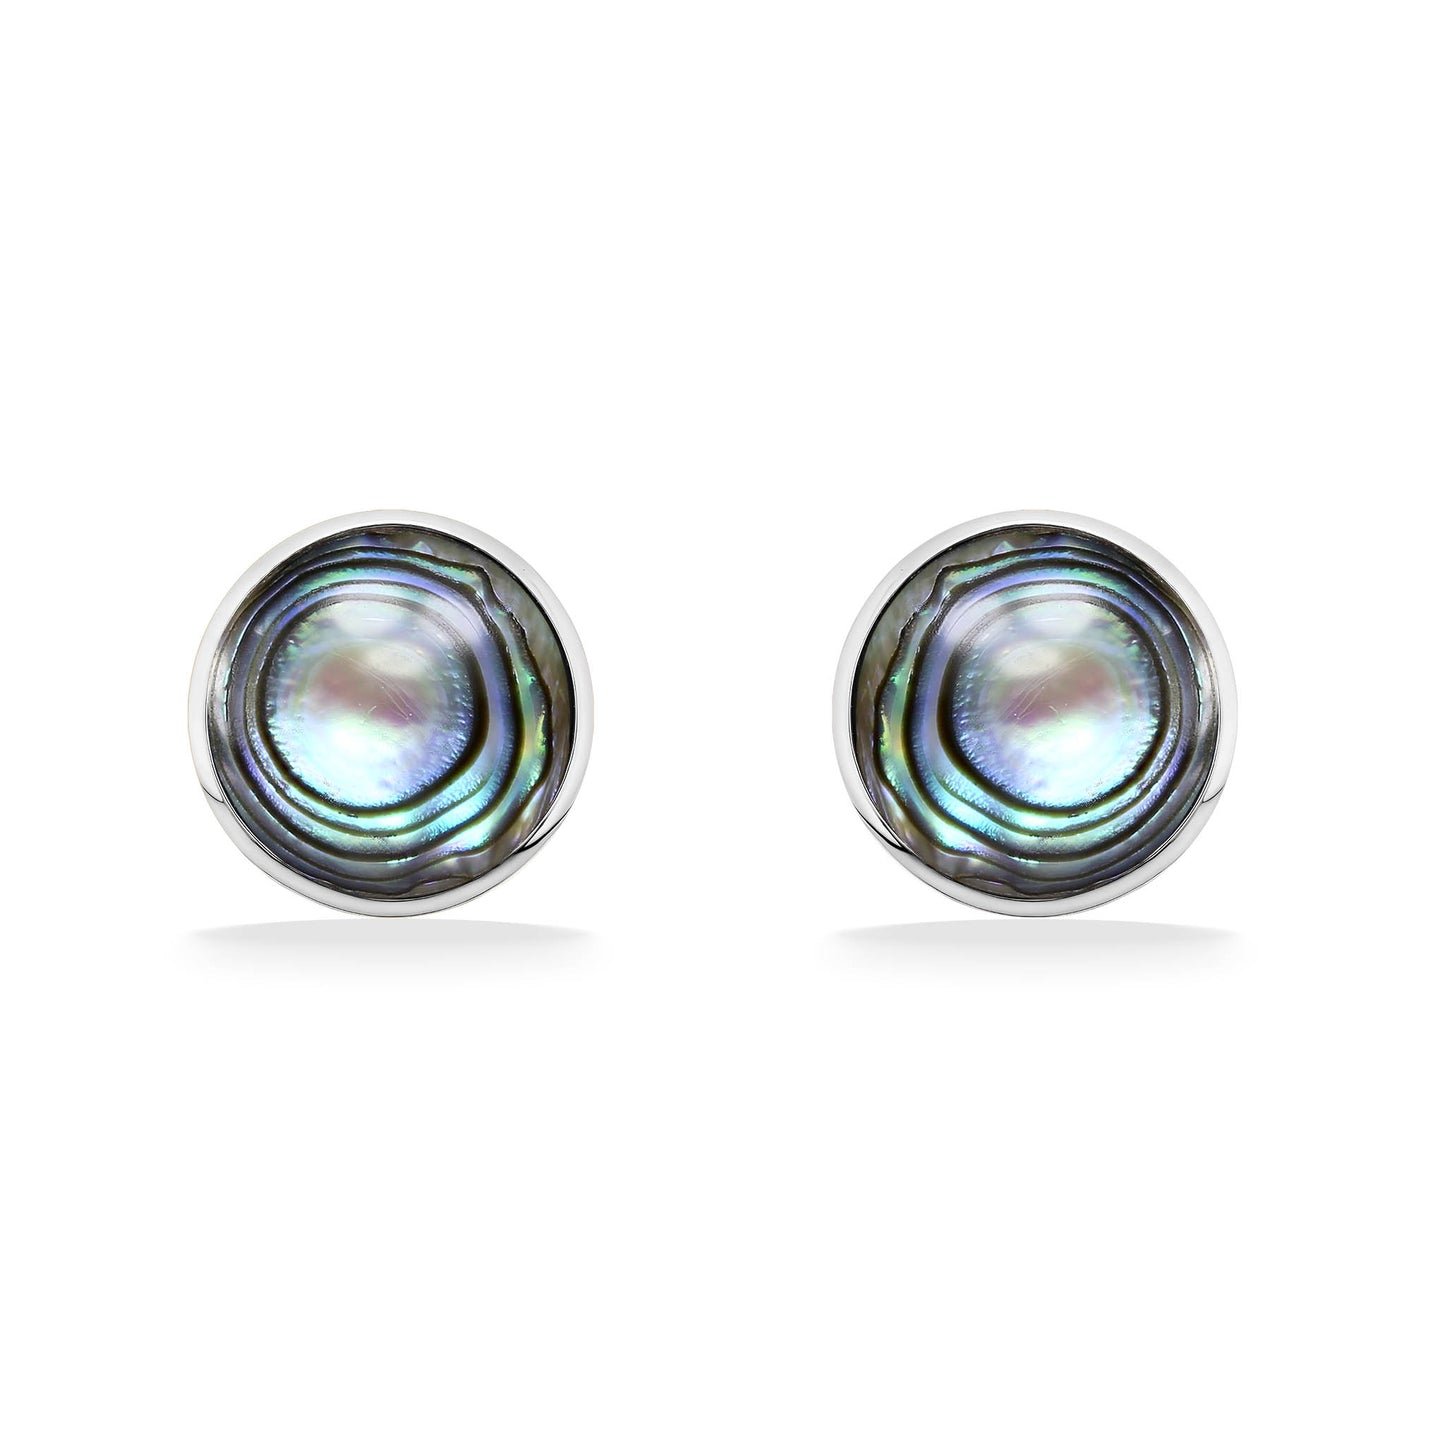 43402 - 14K White Gold - Abalone Inlay Stud Earrings